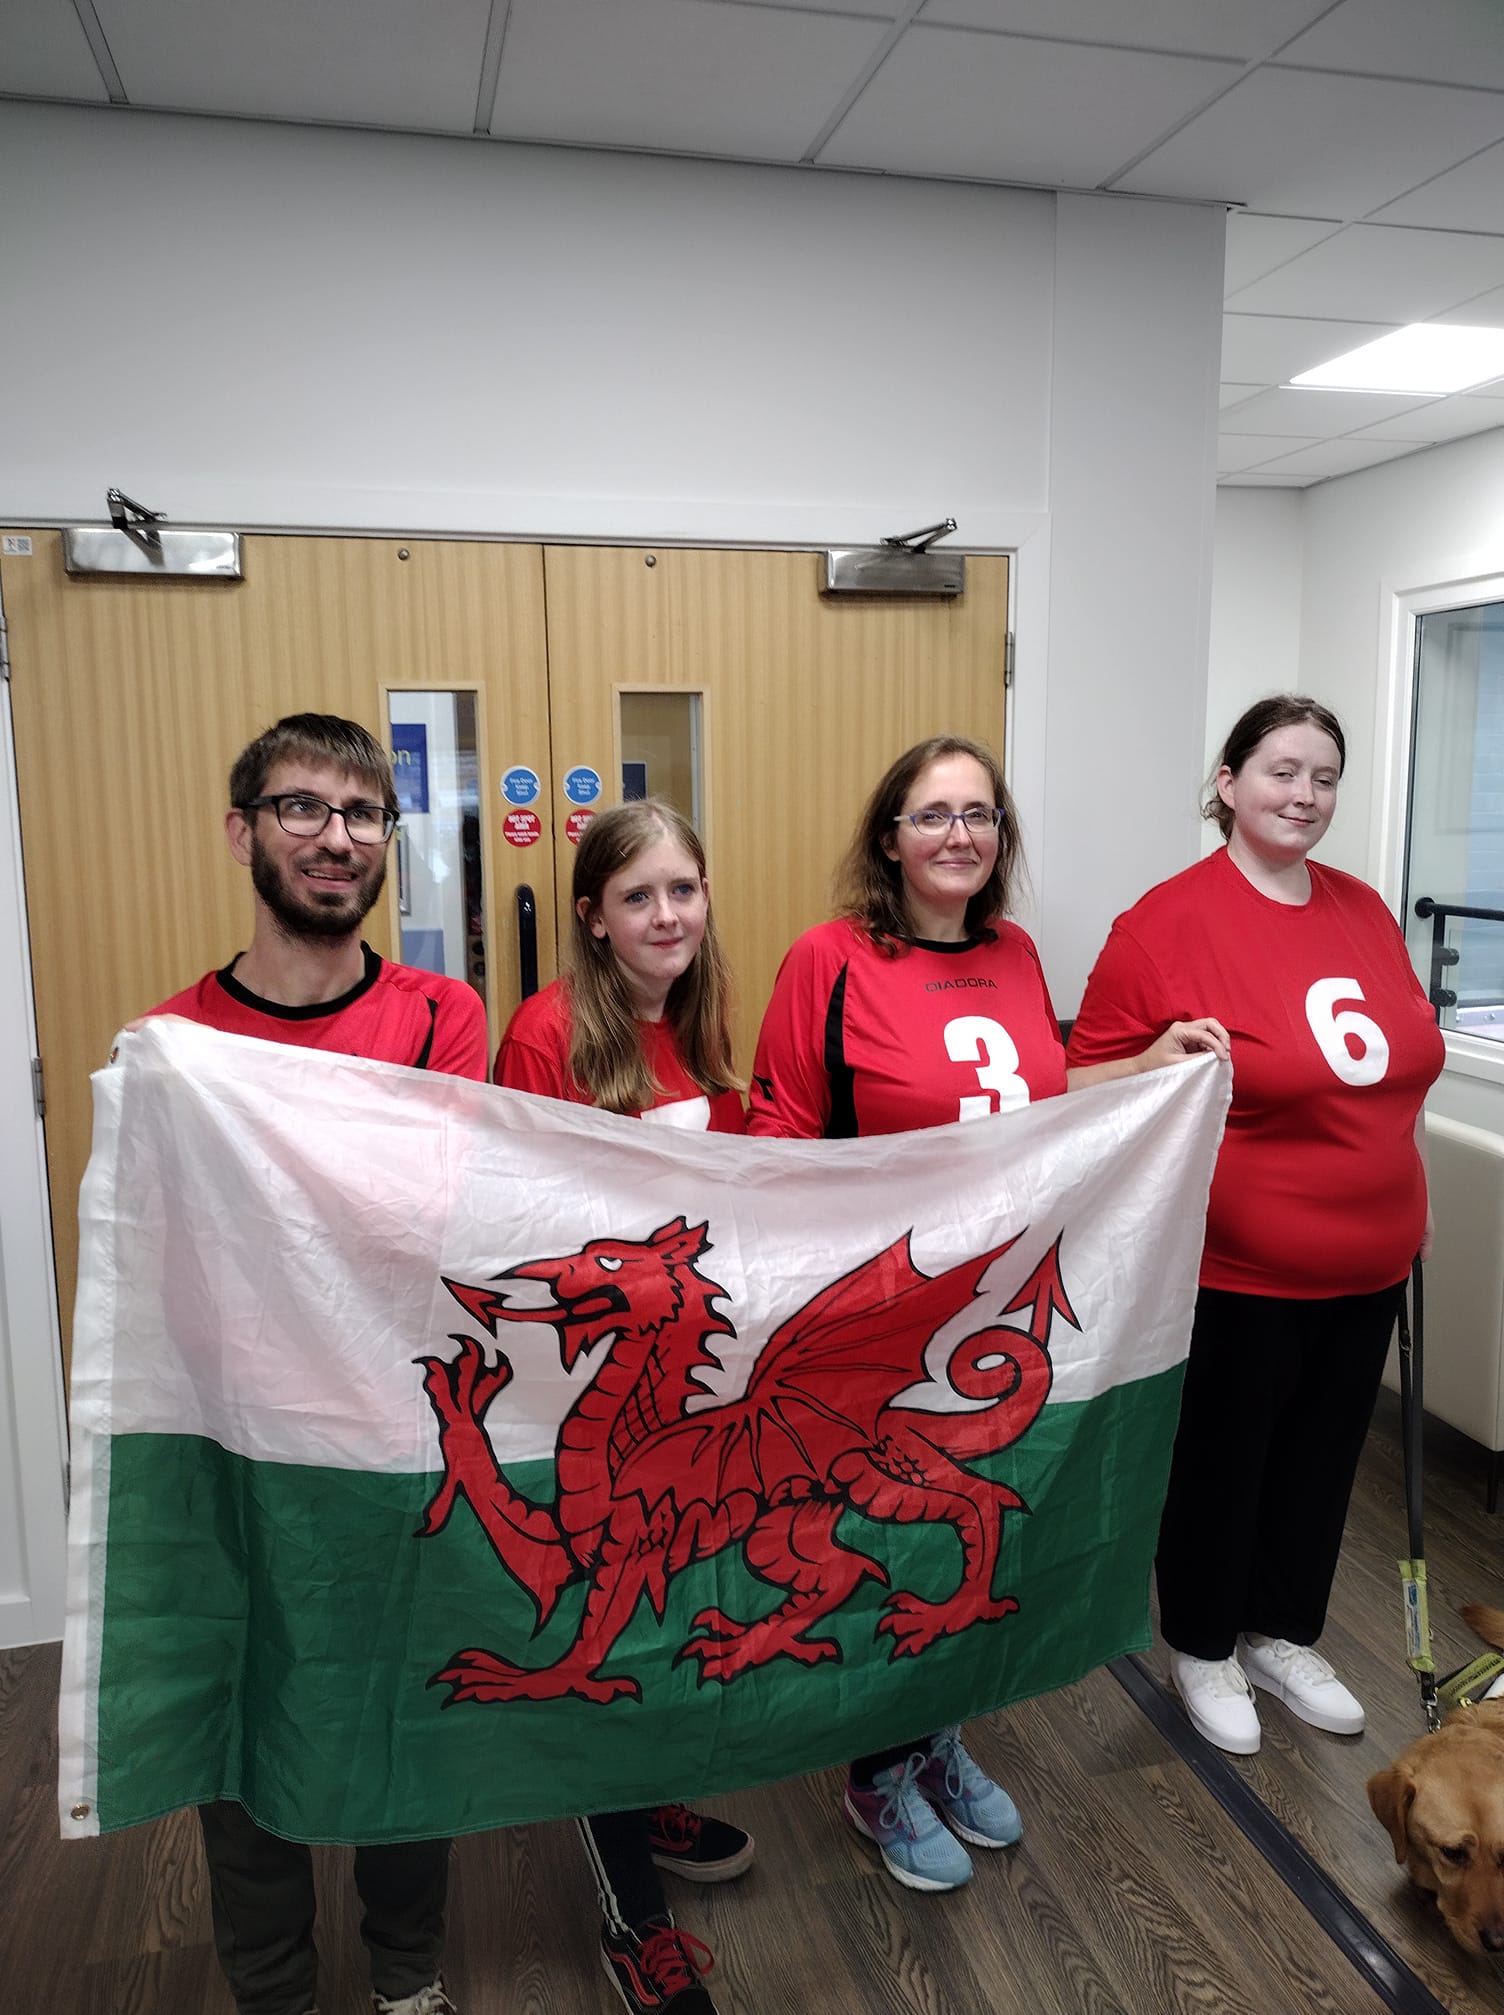 South Wales team of 4 players standing together holding a Welsh flag, with the top half white, bottom half green, and a red dragon in the middle.